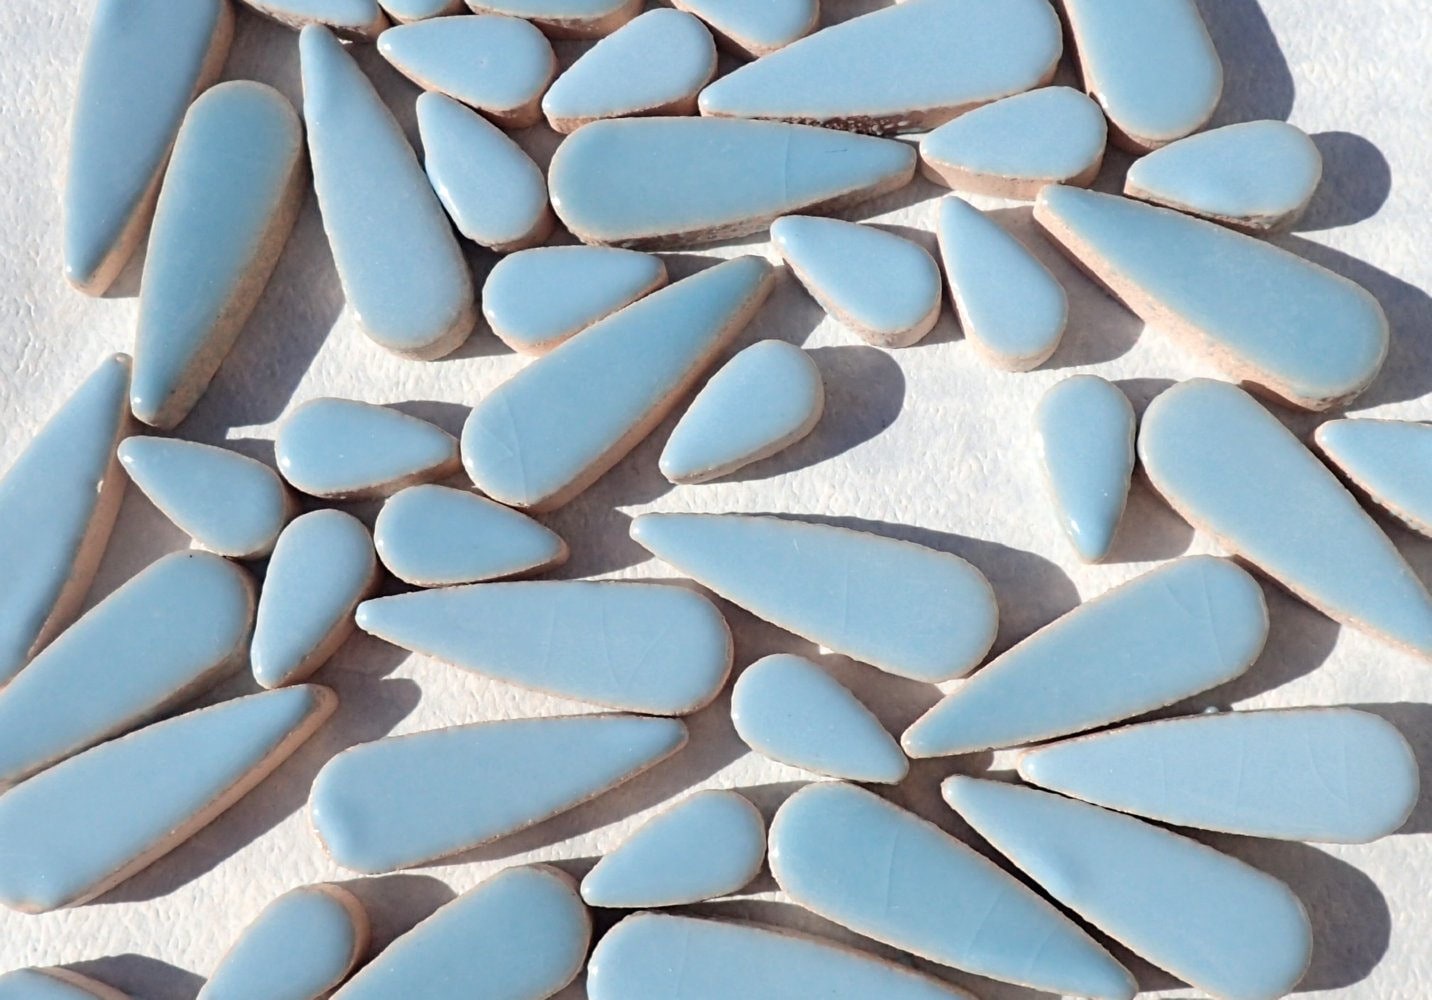 Light Blue Teardrop Mosaic Tiles - 50g Ceramic Petals in Mix of 2 Sizes 1/2" and 3/5" in Azure